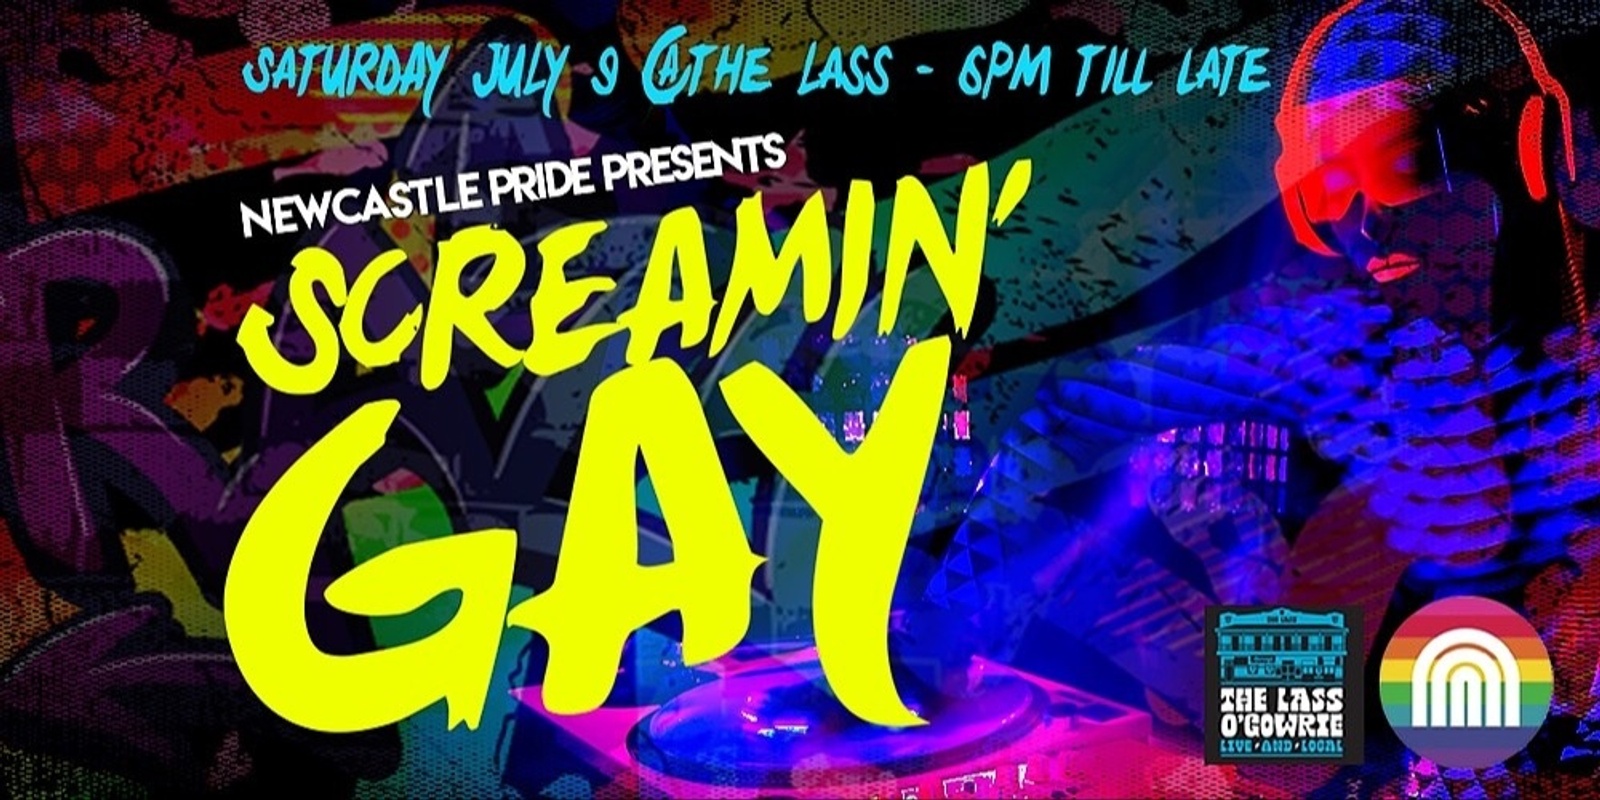 Banner image for Screamin Gay